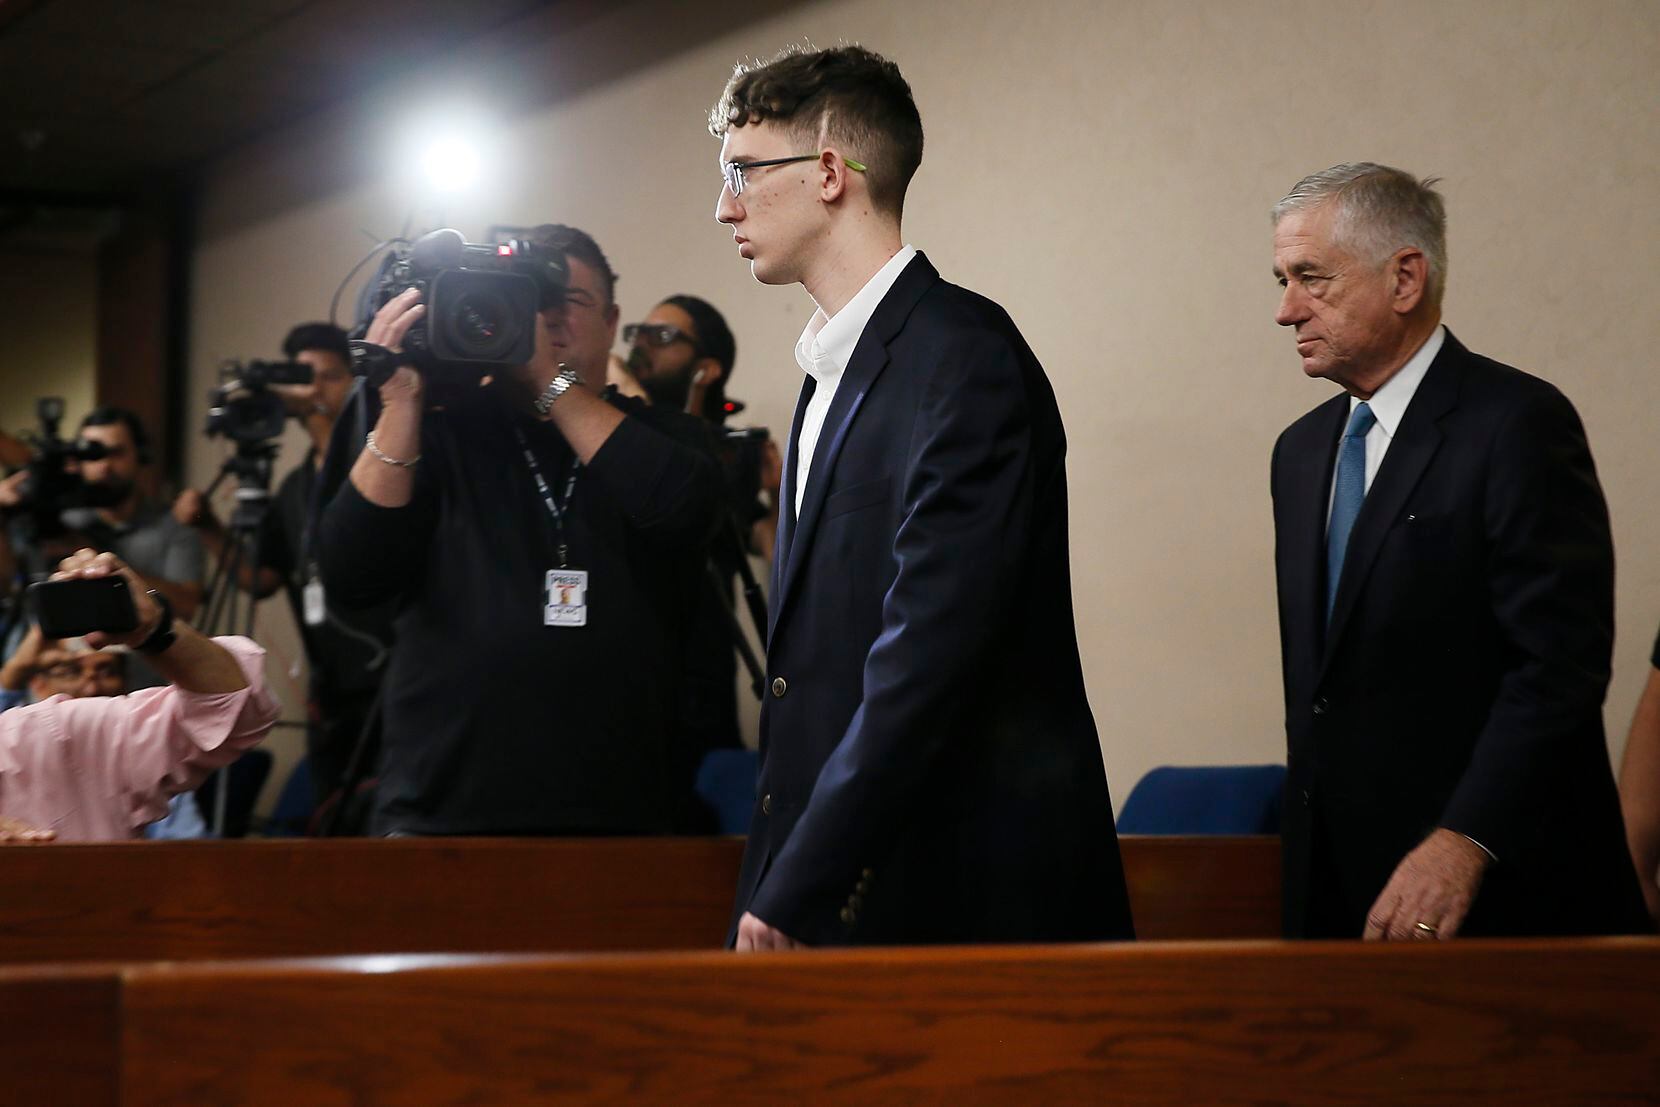 Patrick Crusius on Oct. 10, 2019, in El Paso as he entered a plea of 'not guilty' in state...